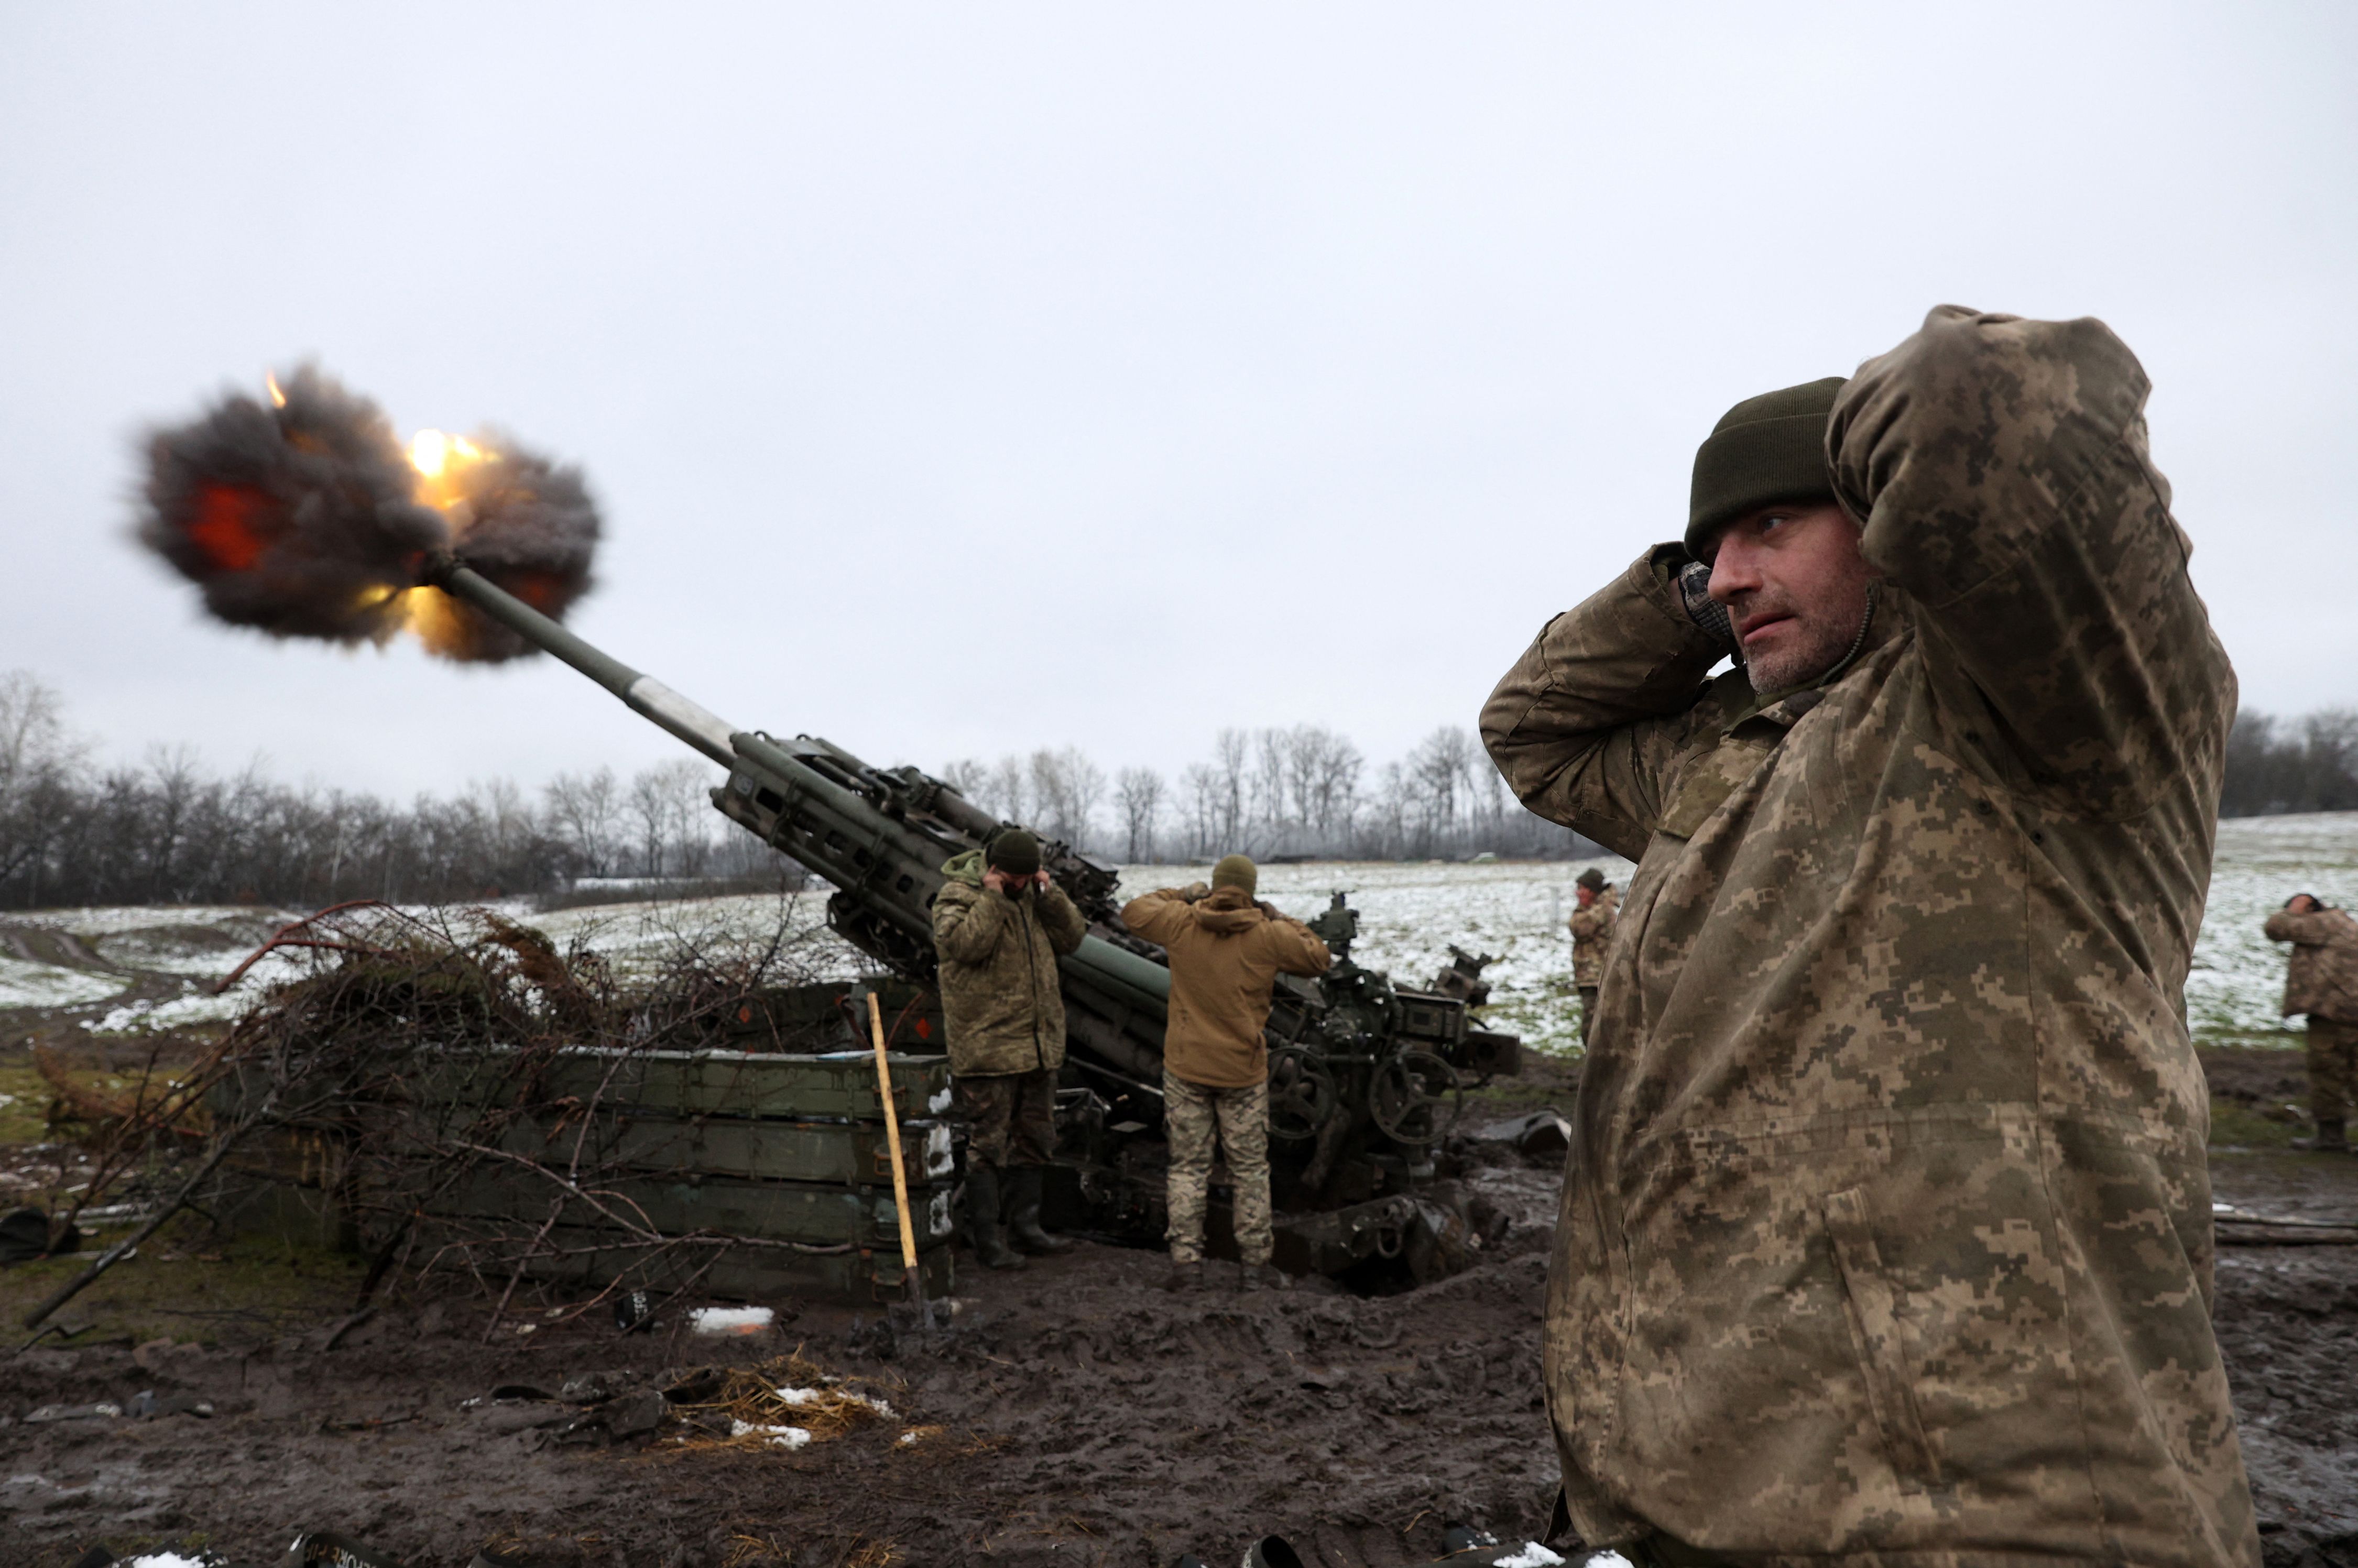 The US Wants to Build Artillery Shells As It Supplies Them to Ukraine